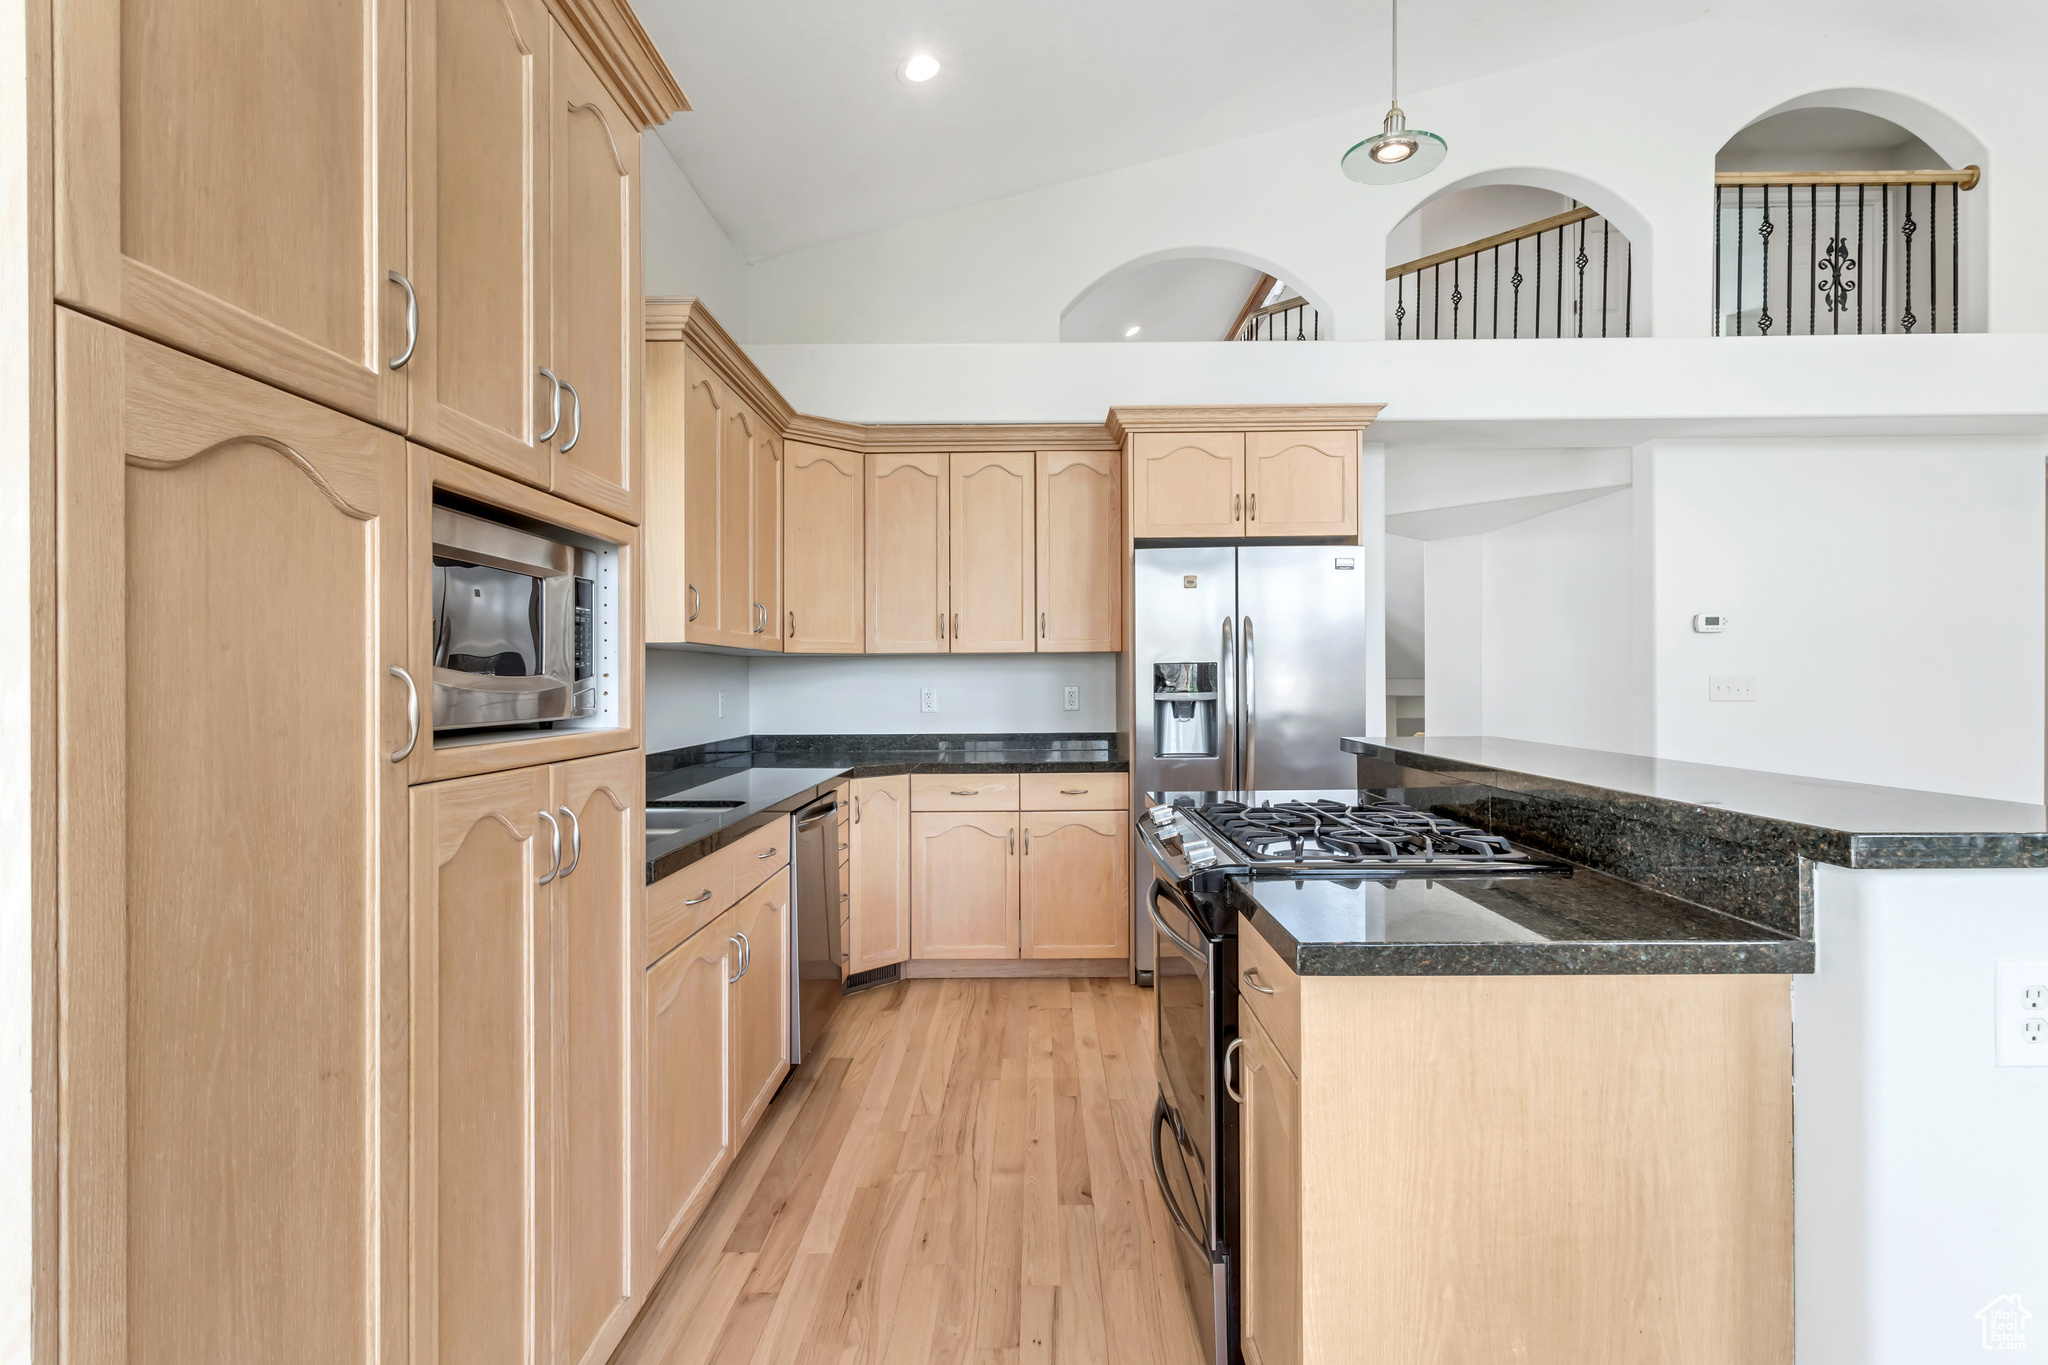 Classic wood cabinets with a fresh modern twist, stainless steel appliances, and island perfect for entertaining